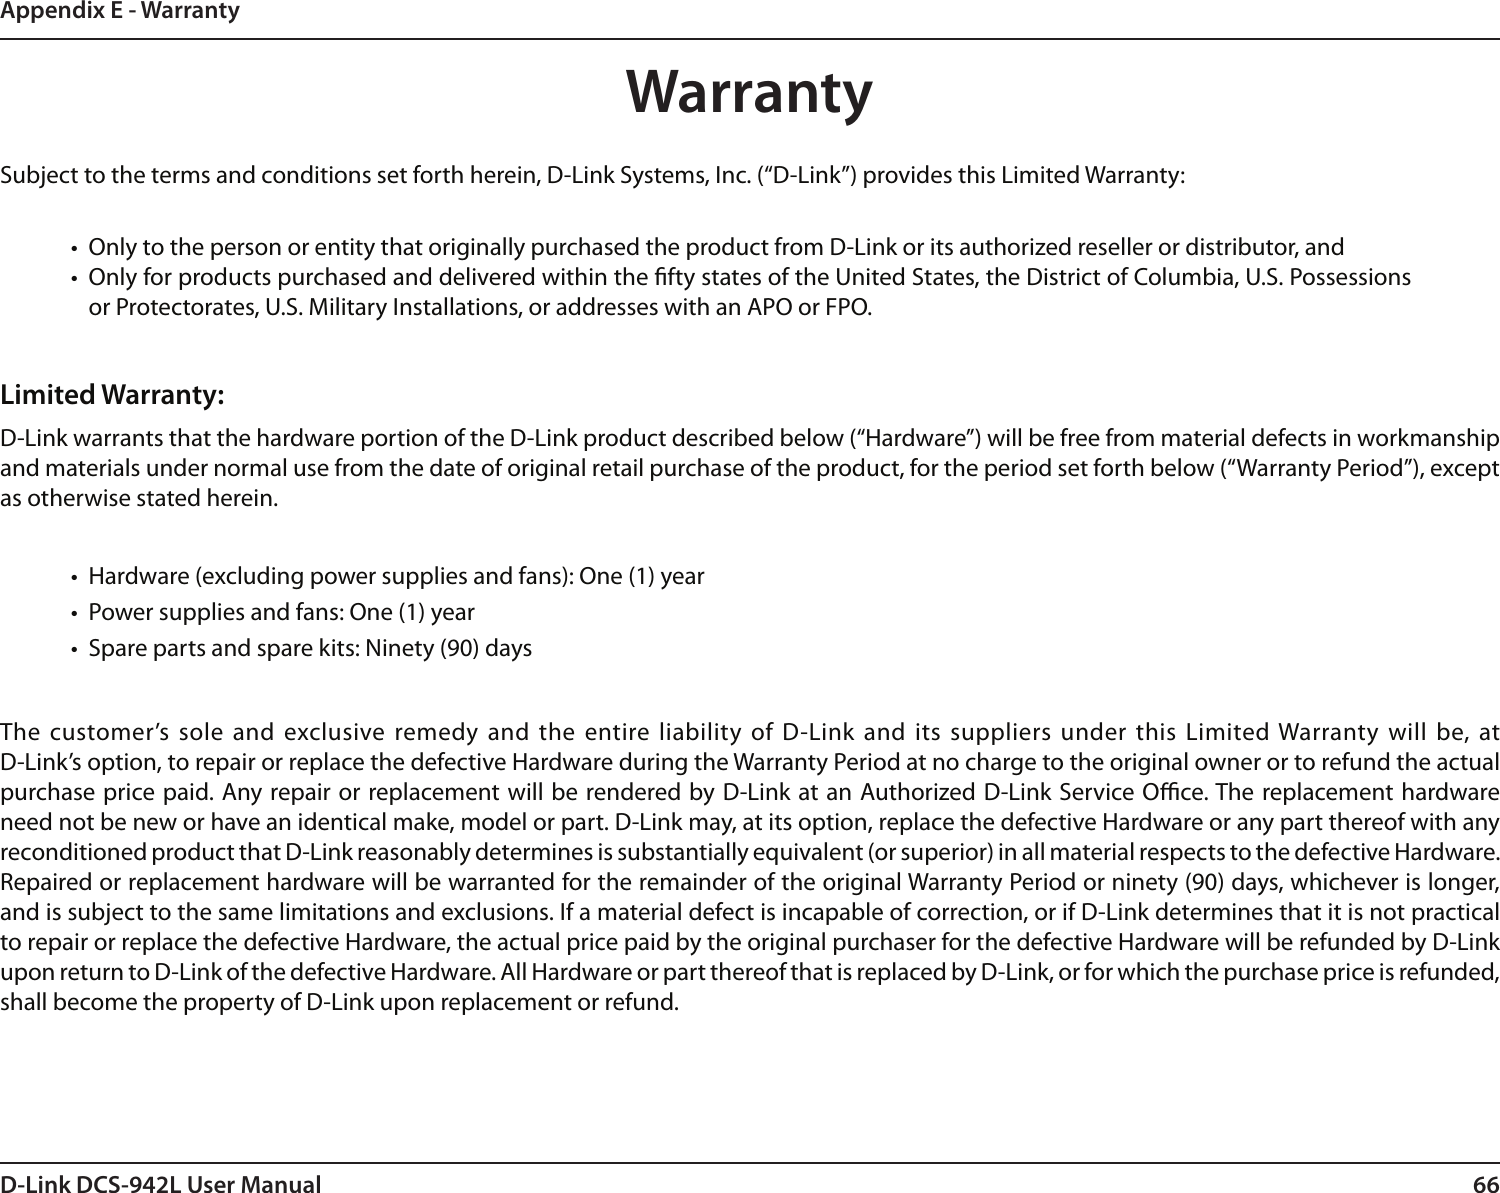 66D-Link DCS-942L User ManualAppendix E - WarrantyWarrantySubject to the terms and conditions set forth herein, D-Link Systems, Inc. (“D-Link”) provides this Limited Warranty:•  Only to the person or entity that originally purchased the product from D-Link or its authorized reseller or distributor, and•  Only for products purchased and delivered within the fty states of the United States, the District of Columbia, U.S. Possessions or Protectorates, U.S. Military Installations, or addresses with an APO or FPO.Limited Warranty:D-Link warrants that the hardware portion of the D-Link product described below (“Hardware”) will be free from material defects in workmanship and materials under normal use from the date of original retail purchase of the product, for the period set forth below (“Warranty Period”), except as otherwise stated herein.•  Hardware (excluding power supplies and fans): One (1) year•  Power supplies and fans: One (1) year•  Spare parts and spare kits: Ninety (90) daysThe customer’s sole  and exclusive remedy and  the entire liability of D-Link and its  suppliers under  this Limited Warranty will  be, at  D-Link’s option, to repair or replace the defective Hardware during the Warranty Period at no charge to the original owner or to refund the actual purchase price paid. Any repair or replacement will be rendered by D-Link at an Authorized D-Link Service Oce. The replacement hardware need not be new or have an identical make, model or part. D-Link may, at its option, replace the defective Hardware or any part thereof with any reconditioned product that D-Link reasonably determines is substantially equivalent (or superior) in all material respects to the defective Hardware. Repaired or replacement hardware will be warranted for the remainder of the original Warranty Period or ninety (90) days, whichever is longer, and is subject to the same limitations and exclusions. If a material defect is incapable of correction, or if D-Link determines that it is not practical to repair or replace the defective Hardware, the actual price paid by the original purchaser for the defective Hardware will be refunded by D-Link upon return to D-Link of the defective Hardware. All Hardware or part thereof that is replaced by D-Link, or for which the purchase price is refunded, shall become the property of D-Link upon replacement or refund.